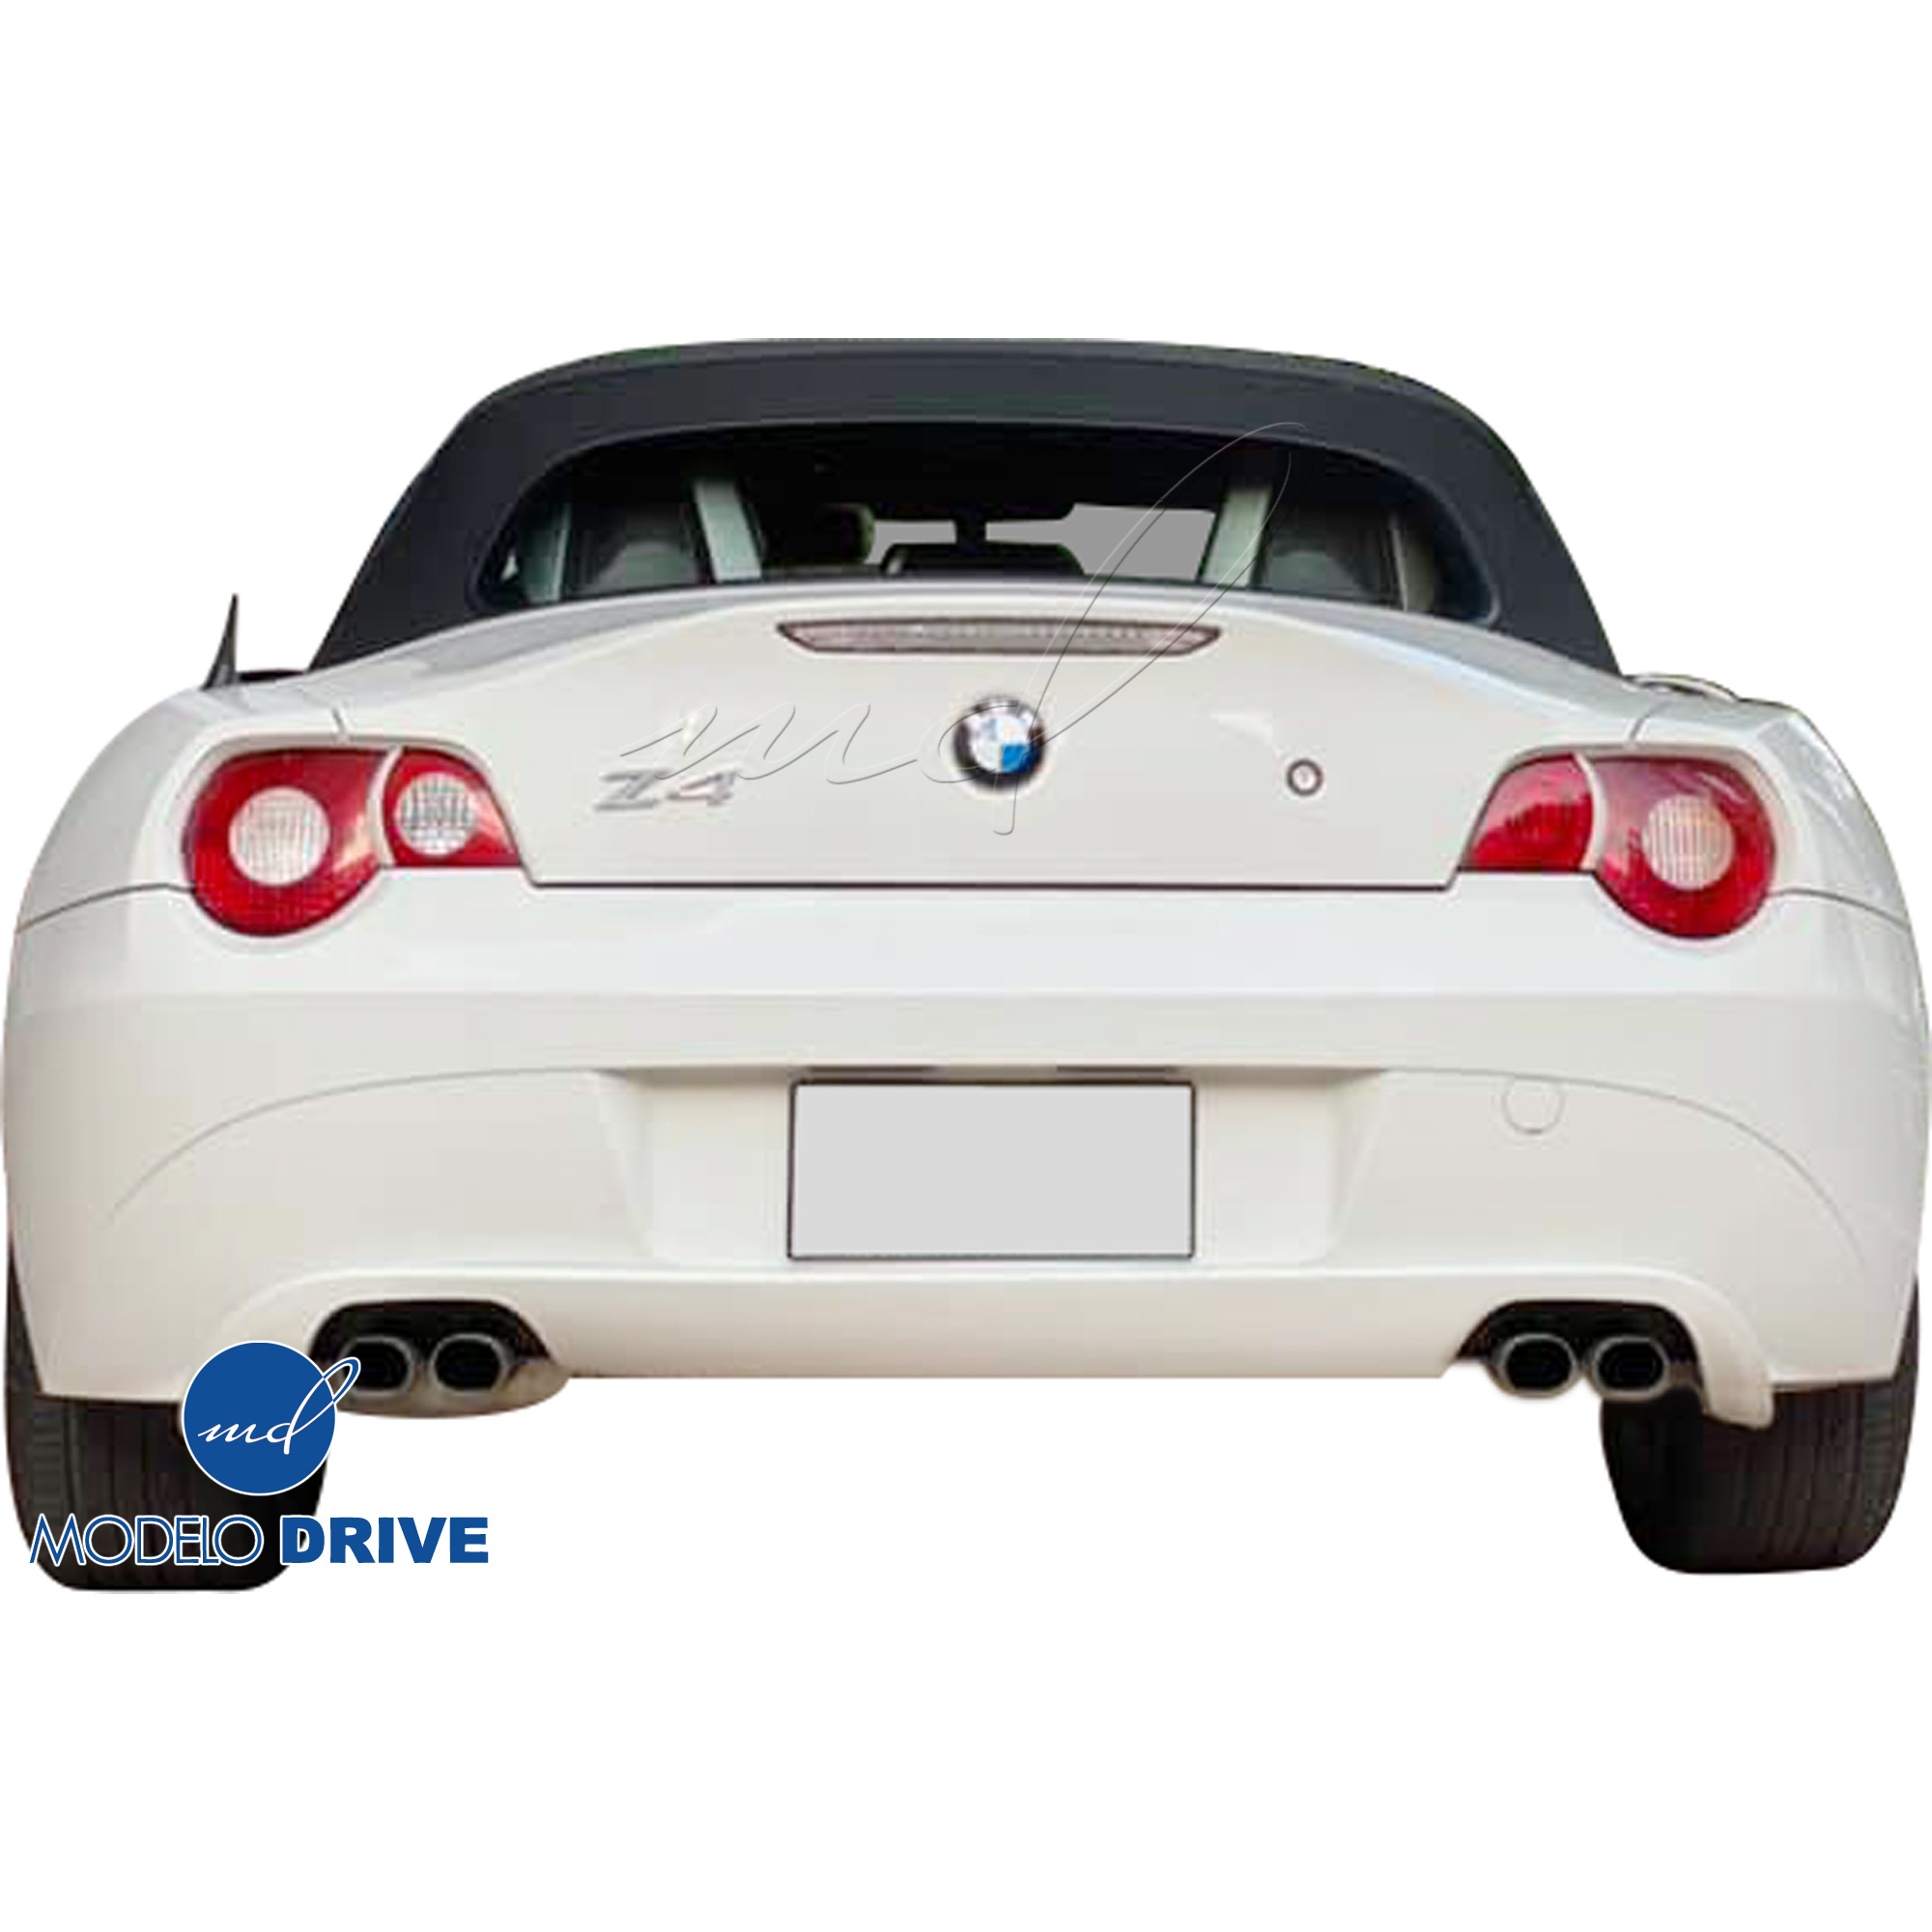 ModeloDrive FRP AERO Diffuser (dual exhst cut outs) > BMW Z4 E85 2003-2005 - Image 15